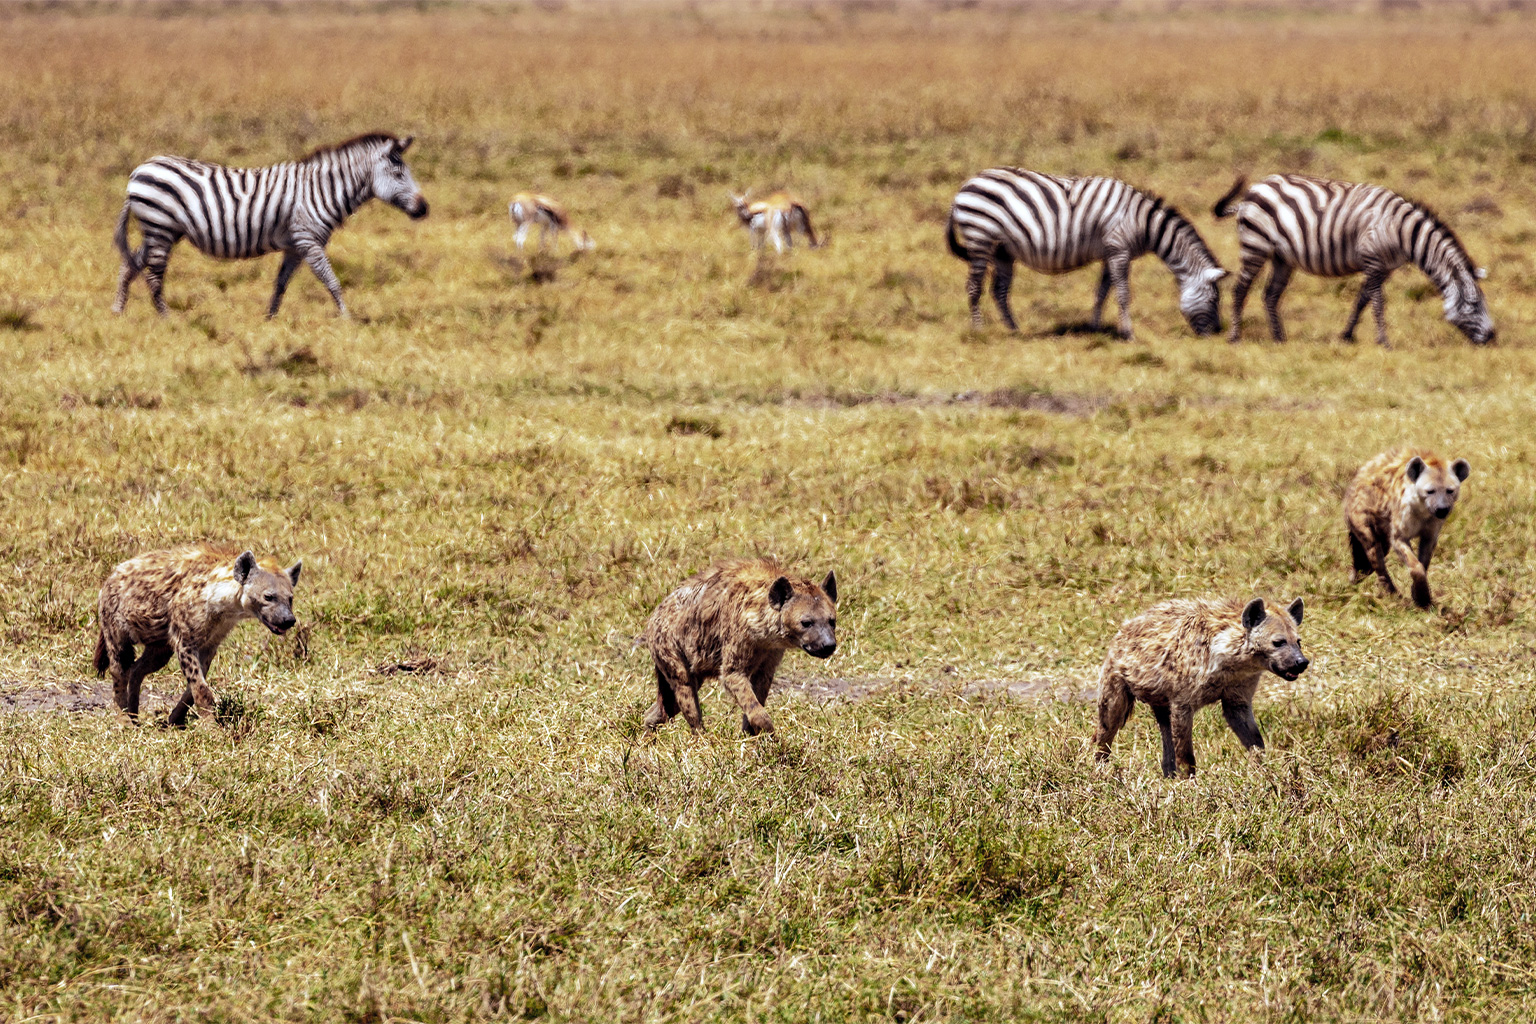 Zebras and hyenas in Ngorongoro, Tanzania. Apex predators, at the top of the food chain, despite their relatively small numbers, often have the greatest impact on shaping an ecosystem. Image by MARIOLA GROBELSKA via Unsplash (Public domain).